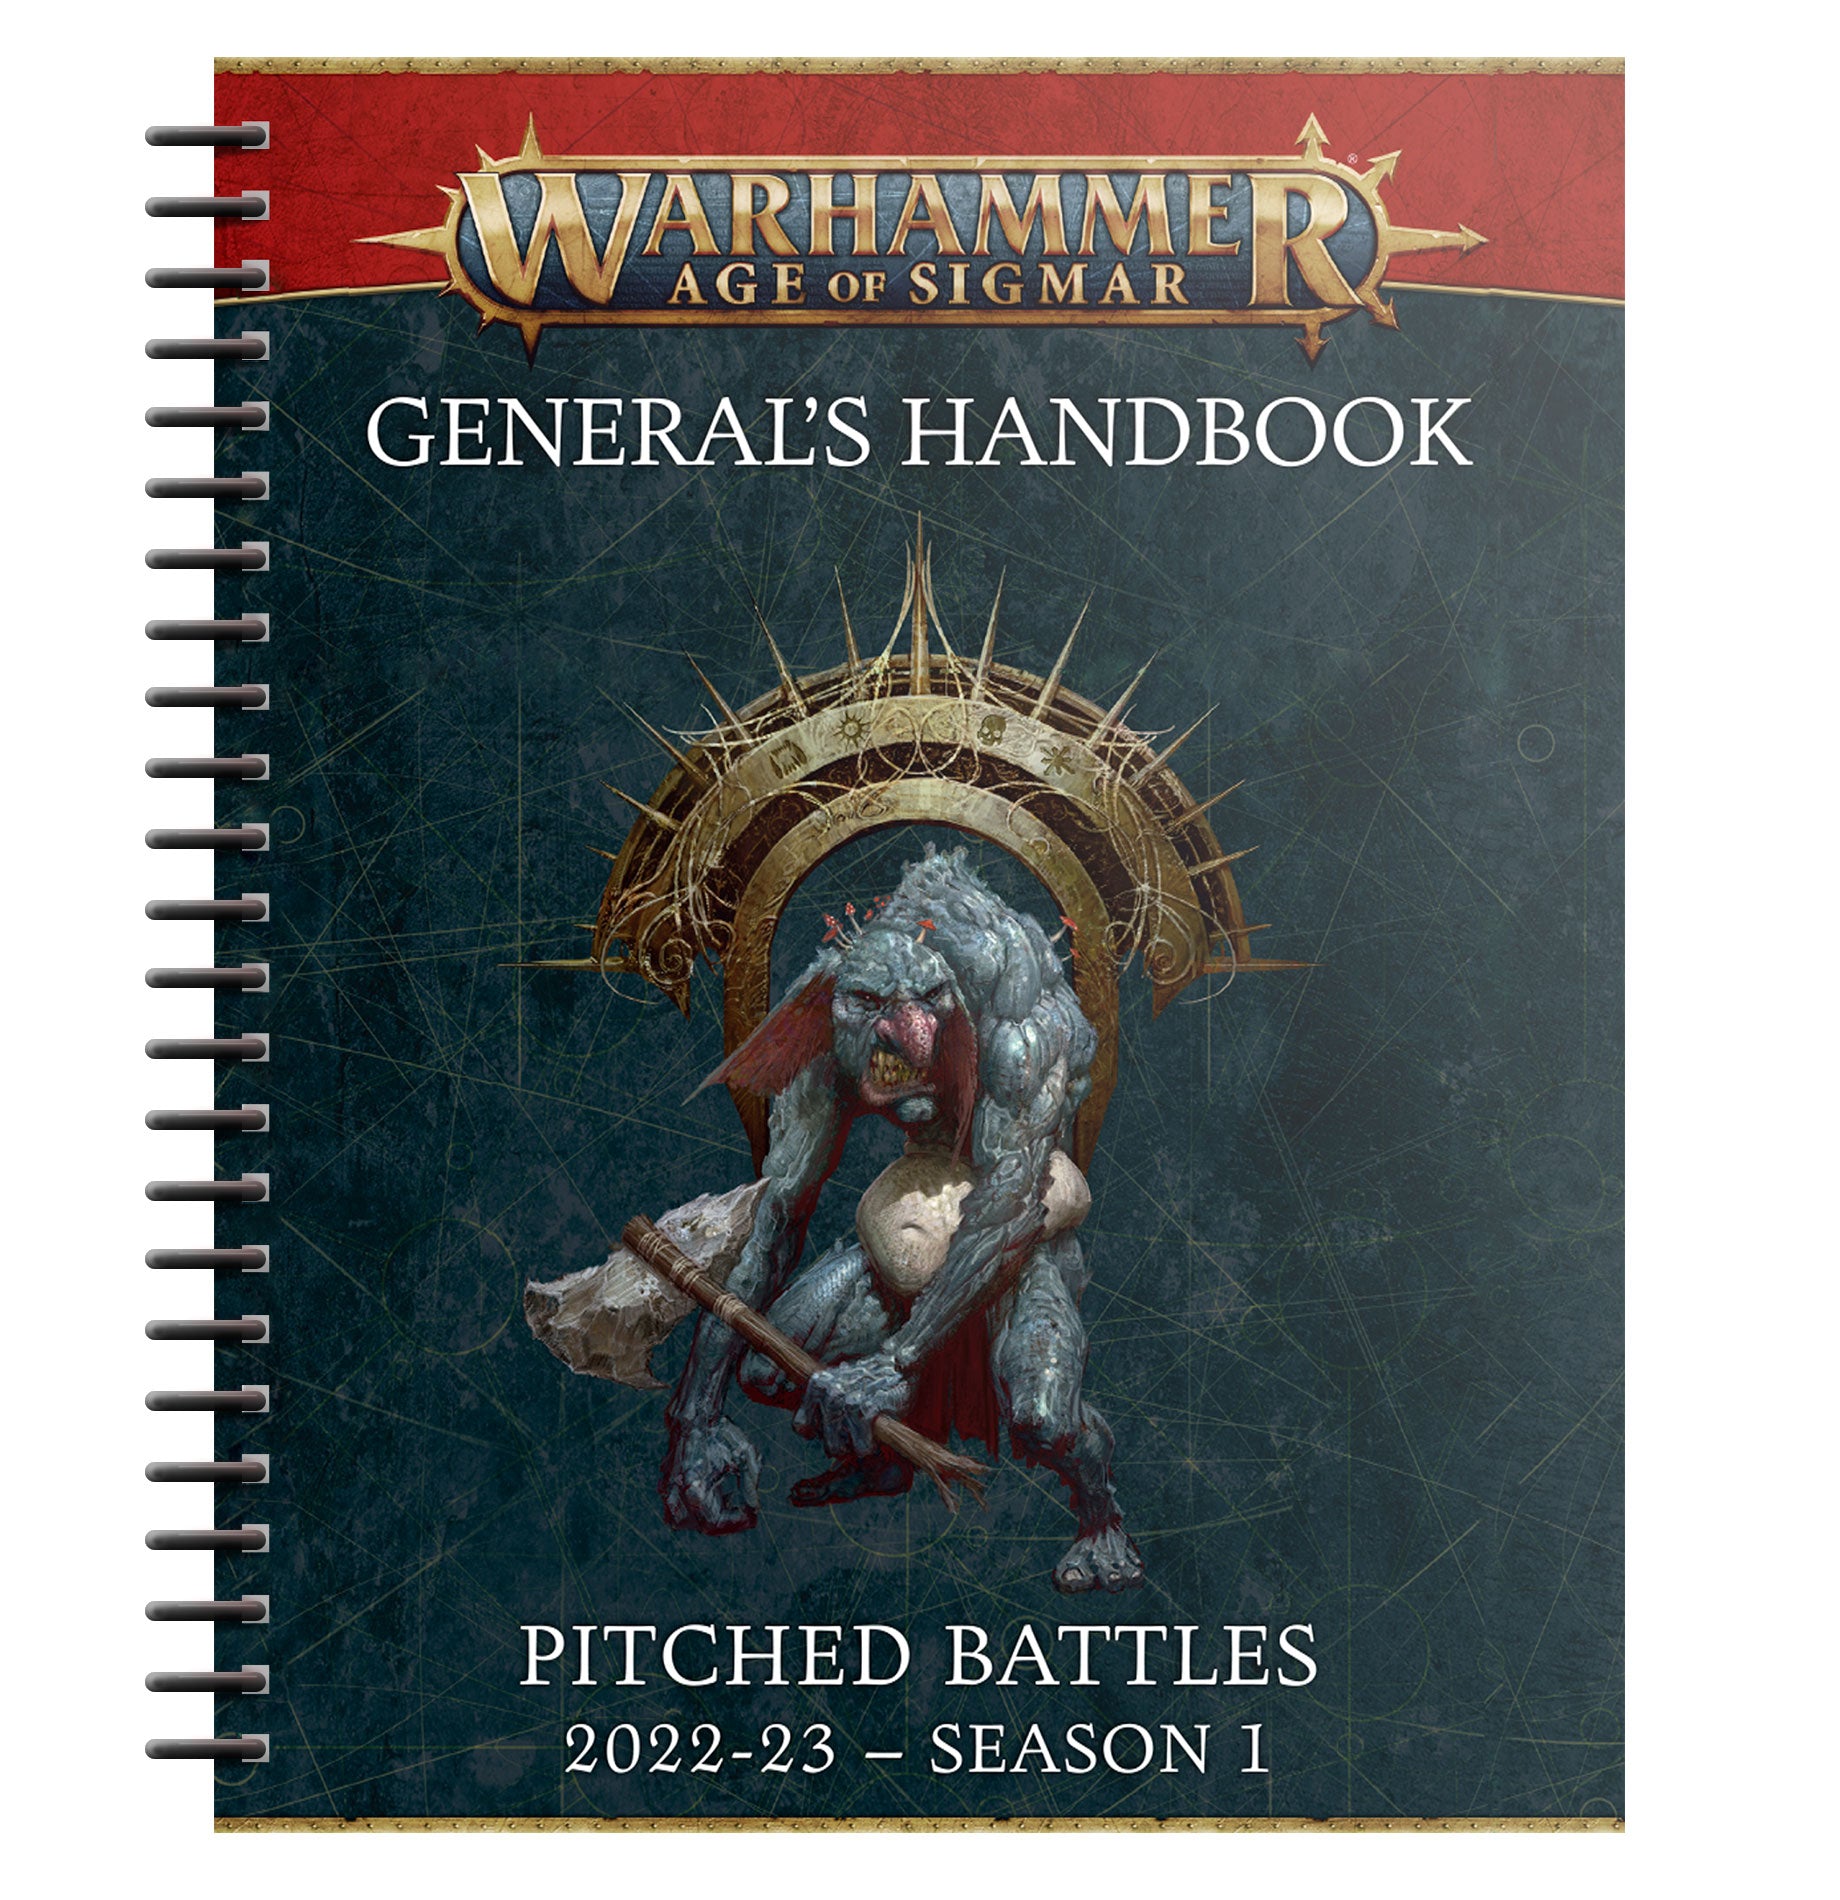 General's Handbook: Pitched Battles 2022-23 Season 1 and Pitched Battle Profiles | Jack's On Queen